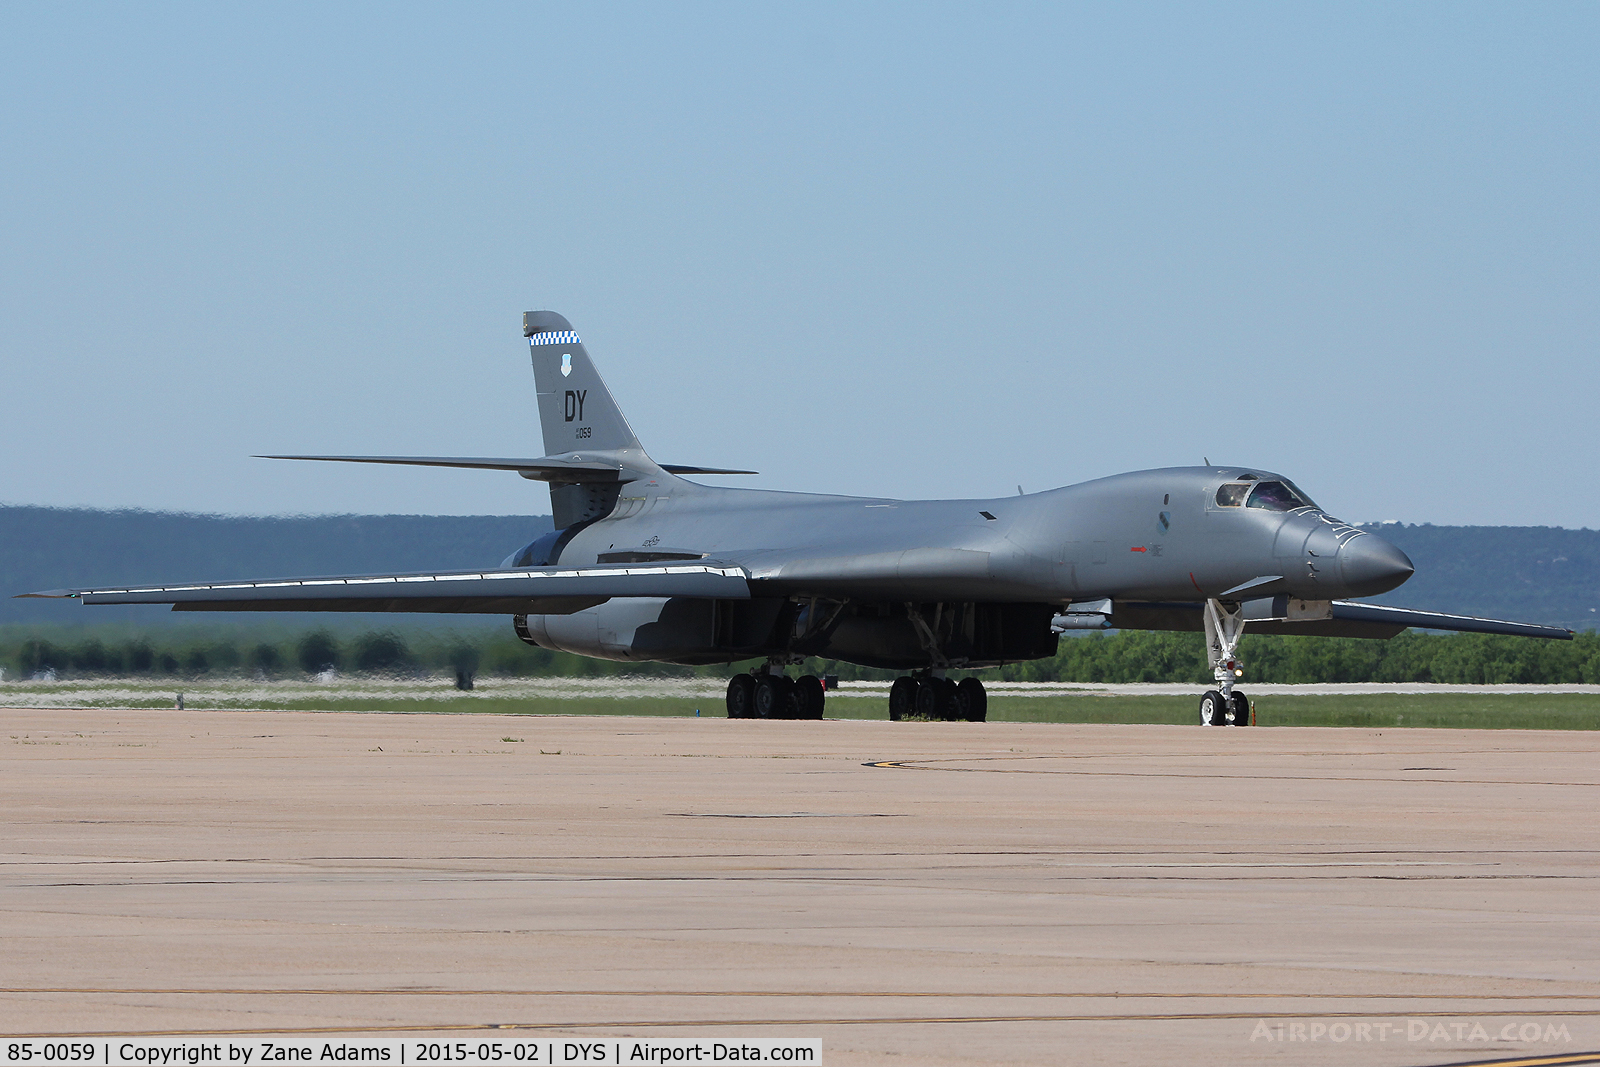 85-0059, 1985 Rockwell B-1B Lancer C/N 19, At the 2015 Big Country Airshow, Dyess AFB, TX